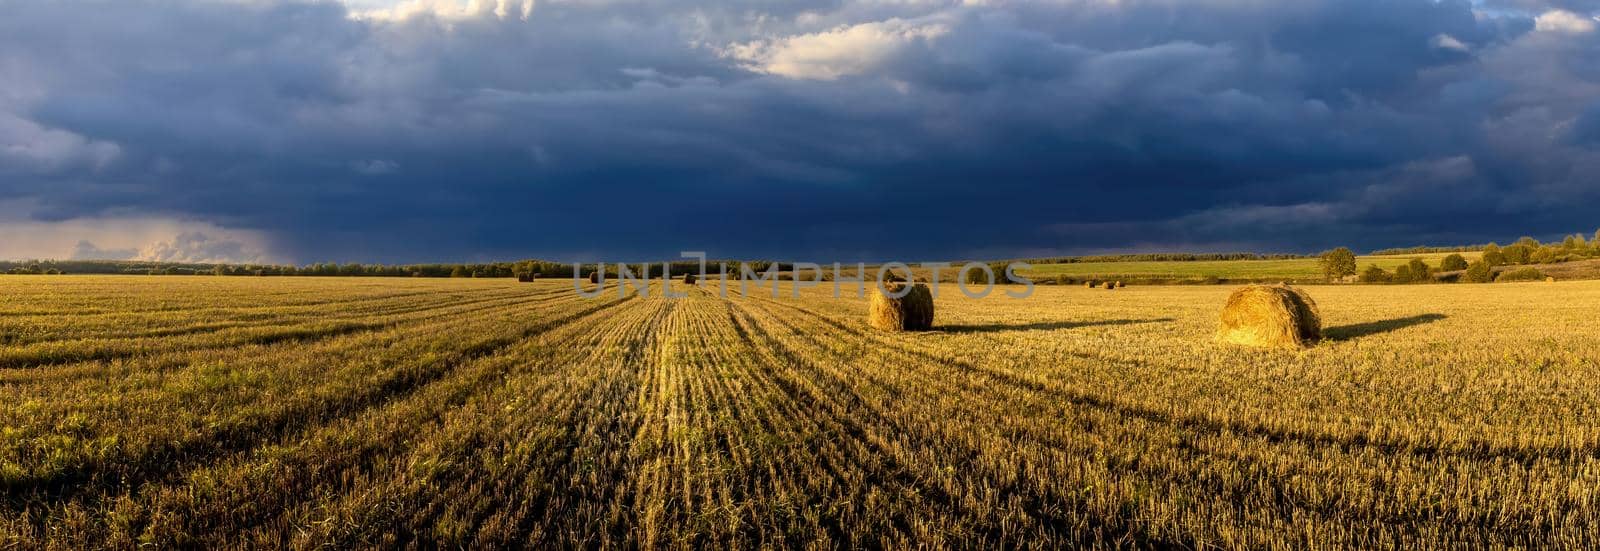 A field of a haystacks on an autumn day, illuminated by sunlight, with rain clouds in the sky. by Eugene_Yemelyanov